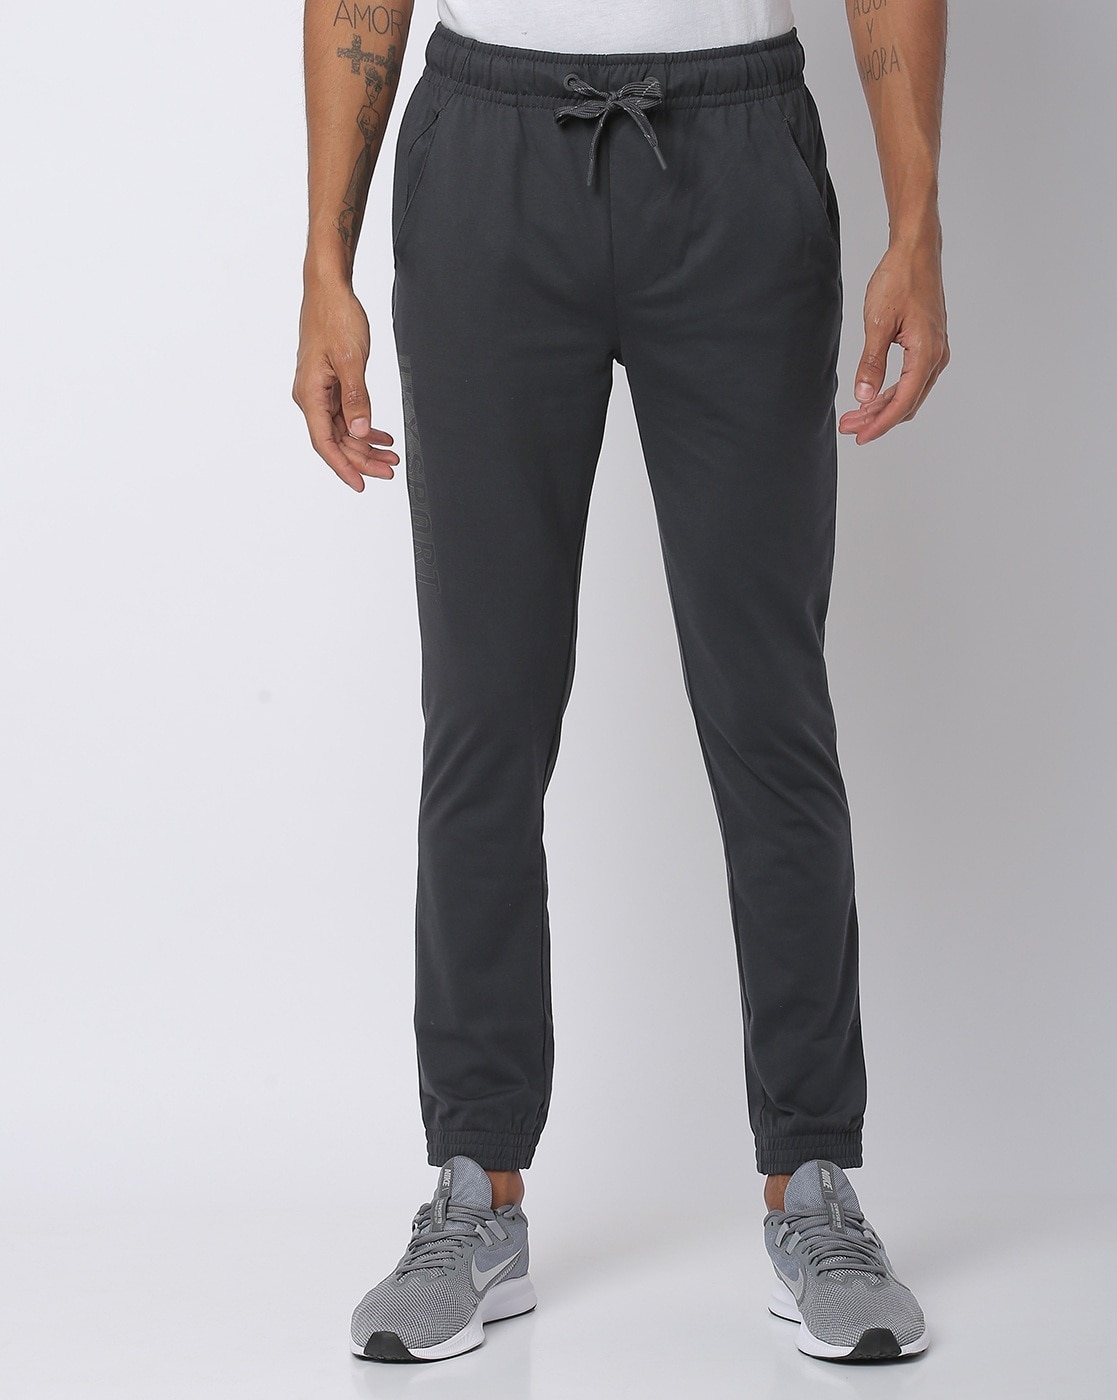 Track pants for men in India in 2021 | Business Insider India